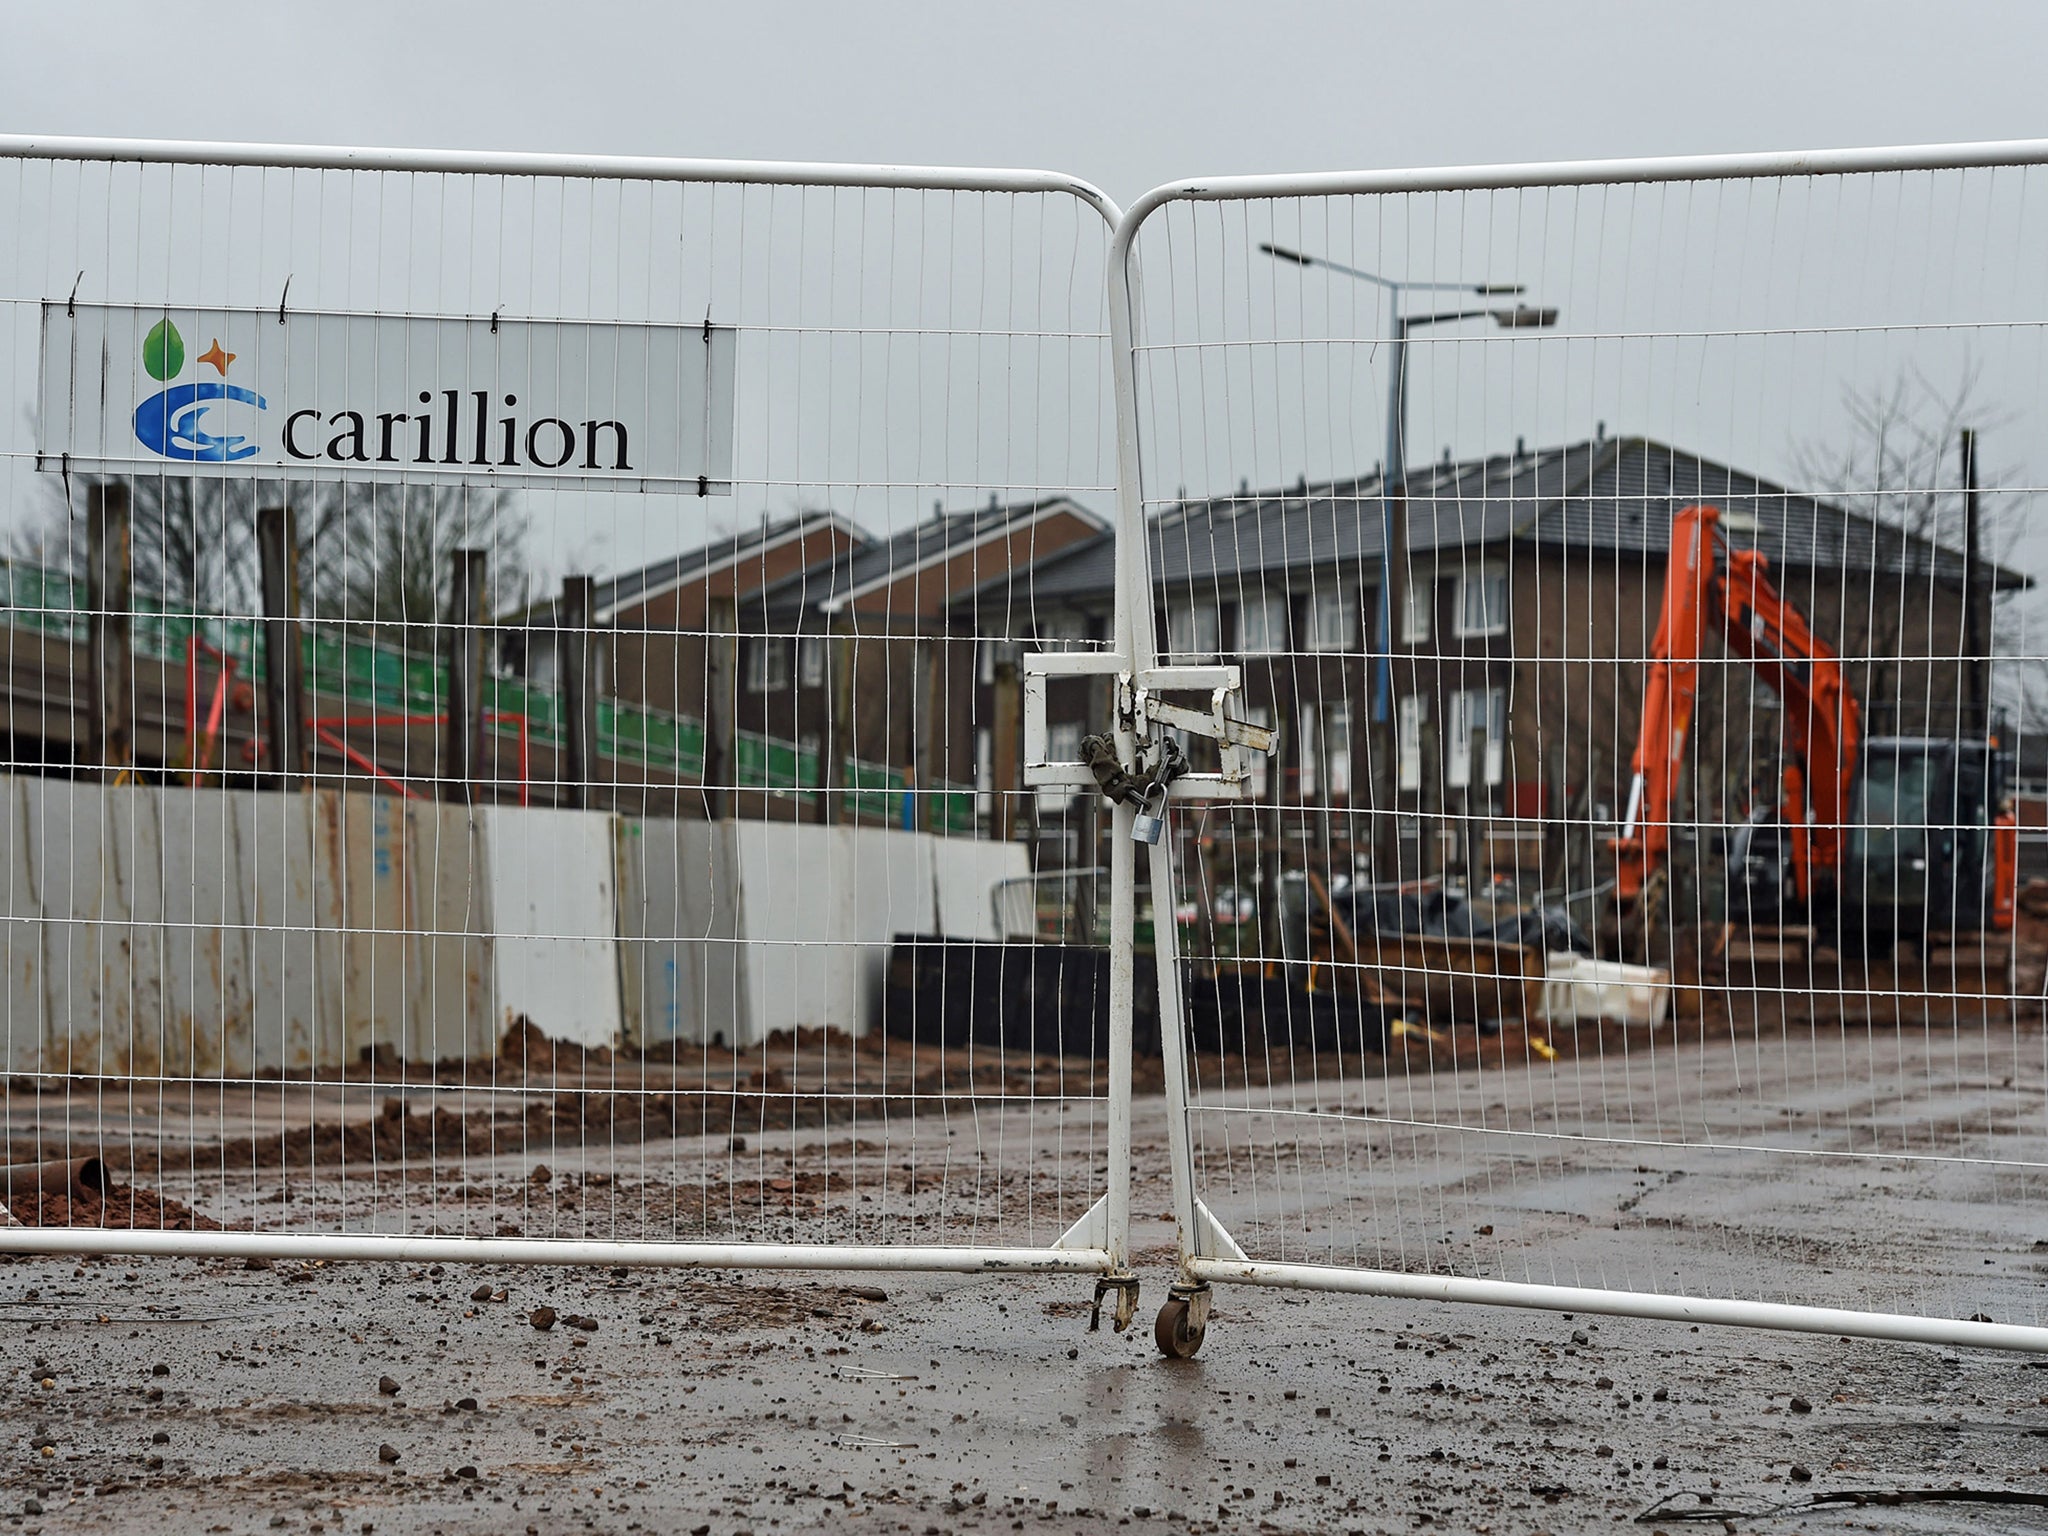 Carillion went into liquidation today after managers concluded they had been left with no other option